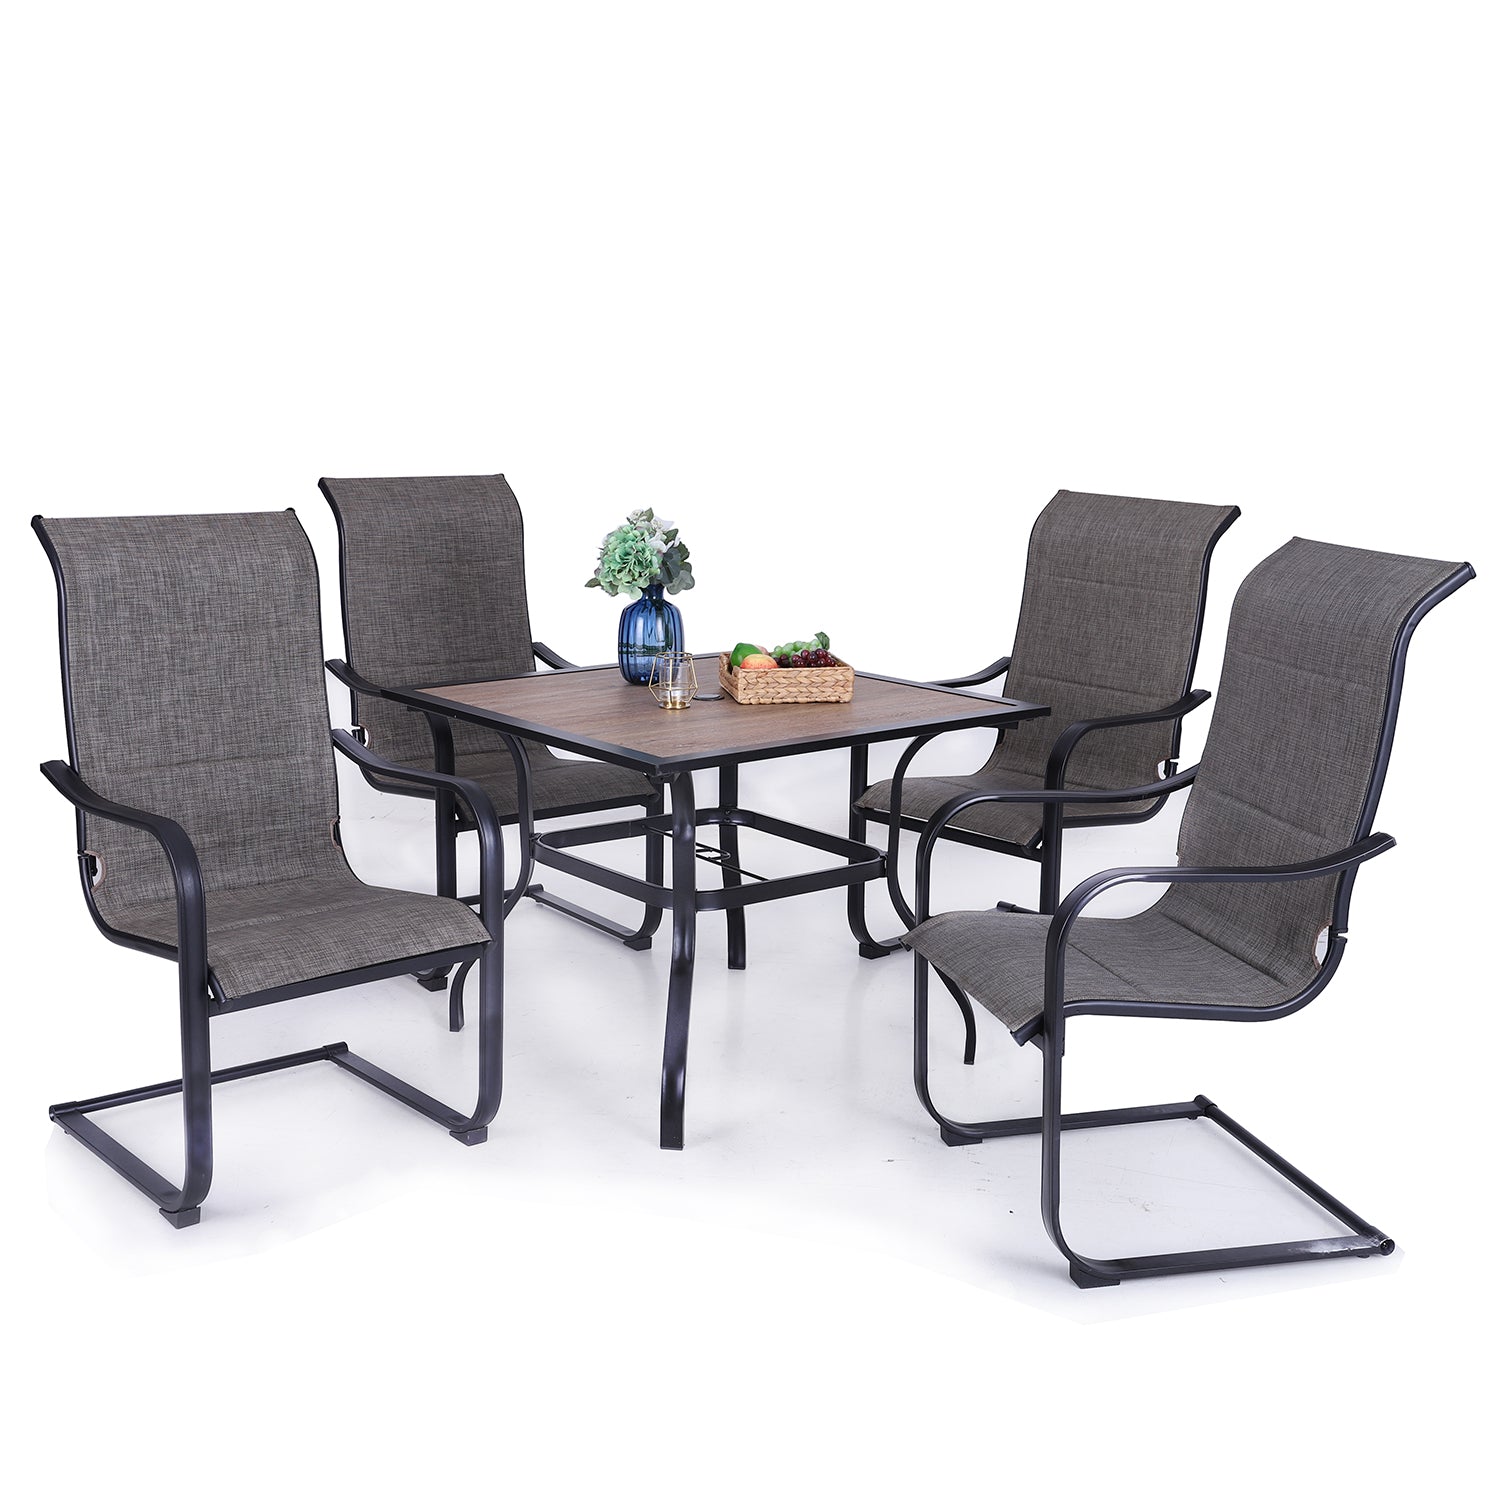 MFSTUDIO Wood-look Square Table & 4 Textilene C-spring Chairs 5-Piece Outdoor Dining Set